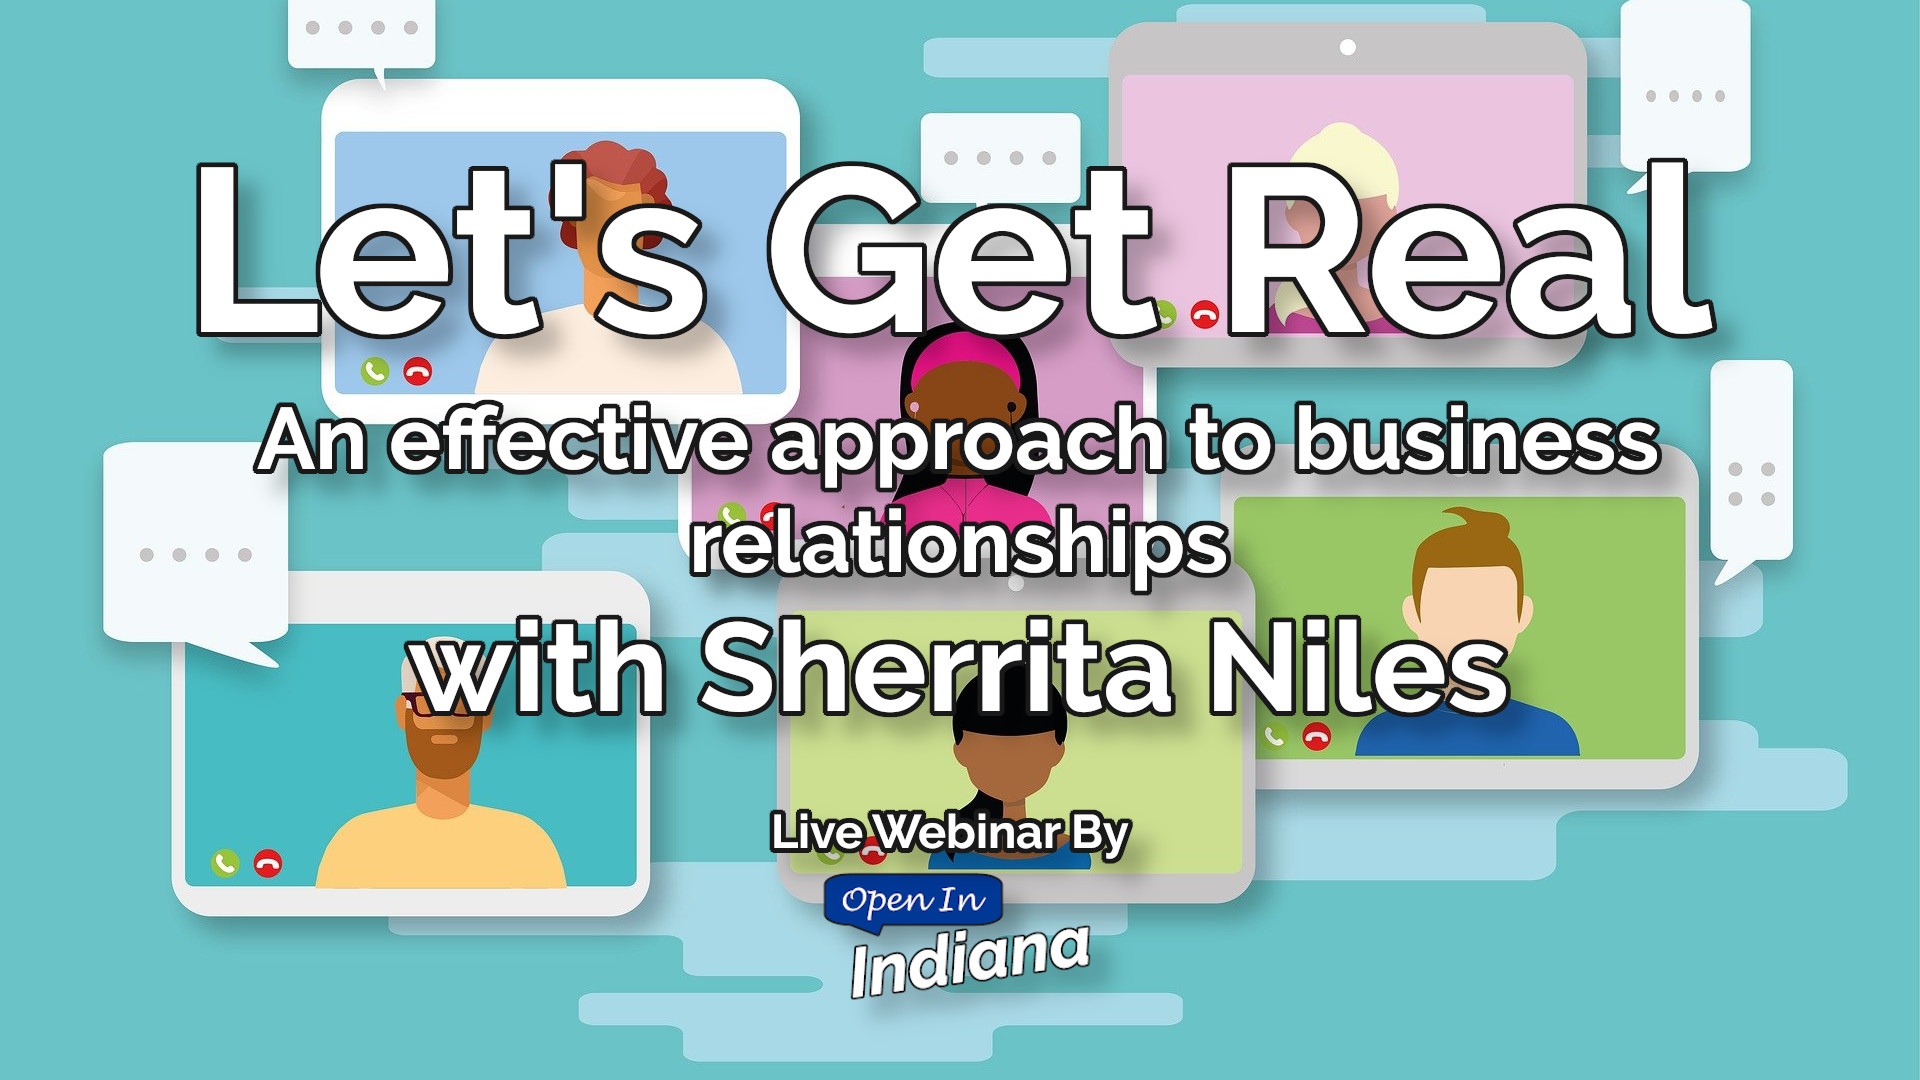 Let's Get Real: An effective approach to business relationships with Sherrita Niles, Live Webinar by Open In Indiana/INSPIREsmall.biz